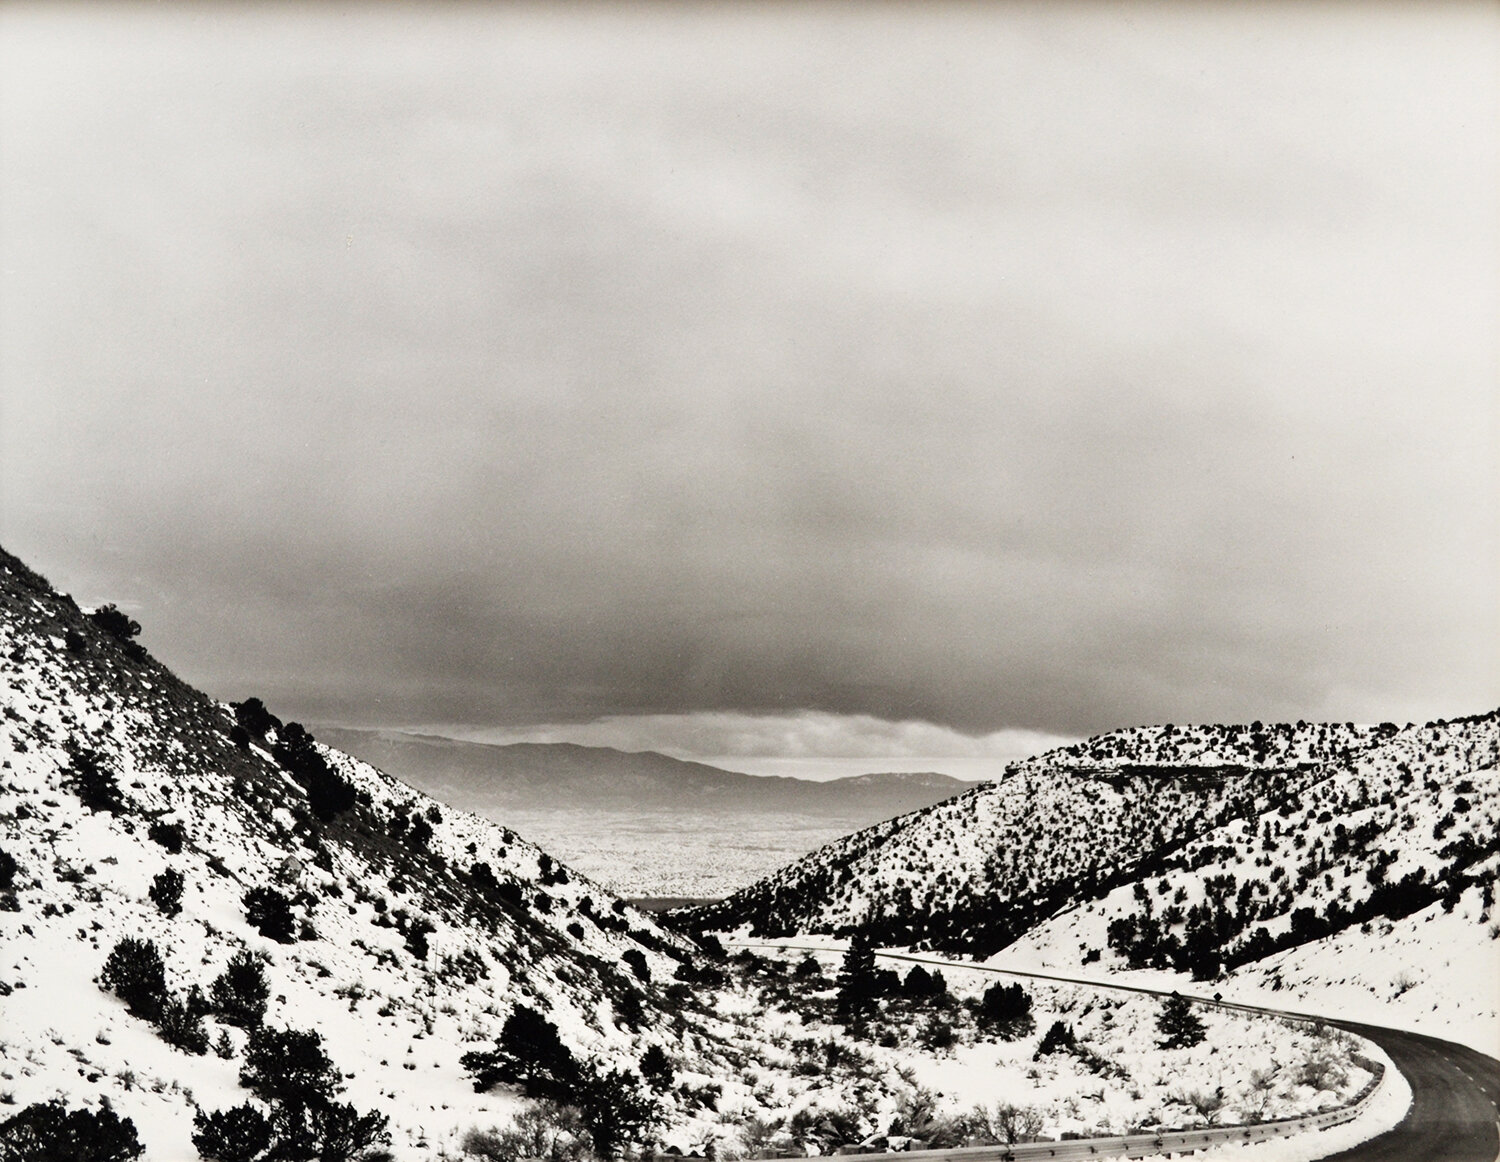 Janet Russek: Fu - Return (The Turning Point): Road from Puye Cliffs, New Mexico, 1984